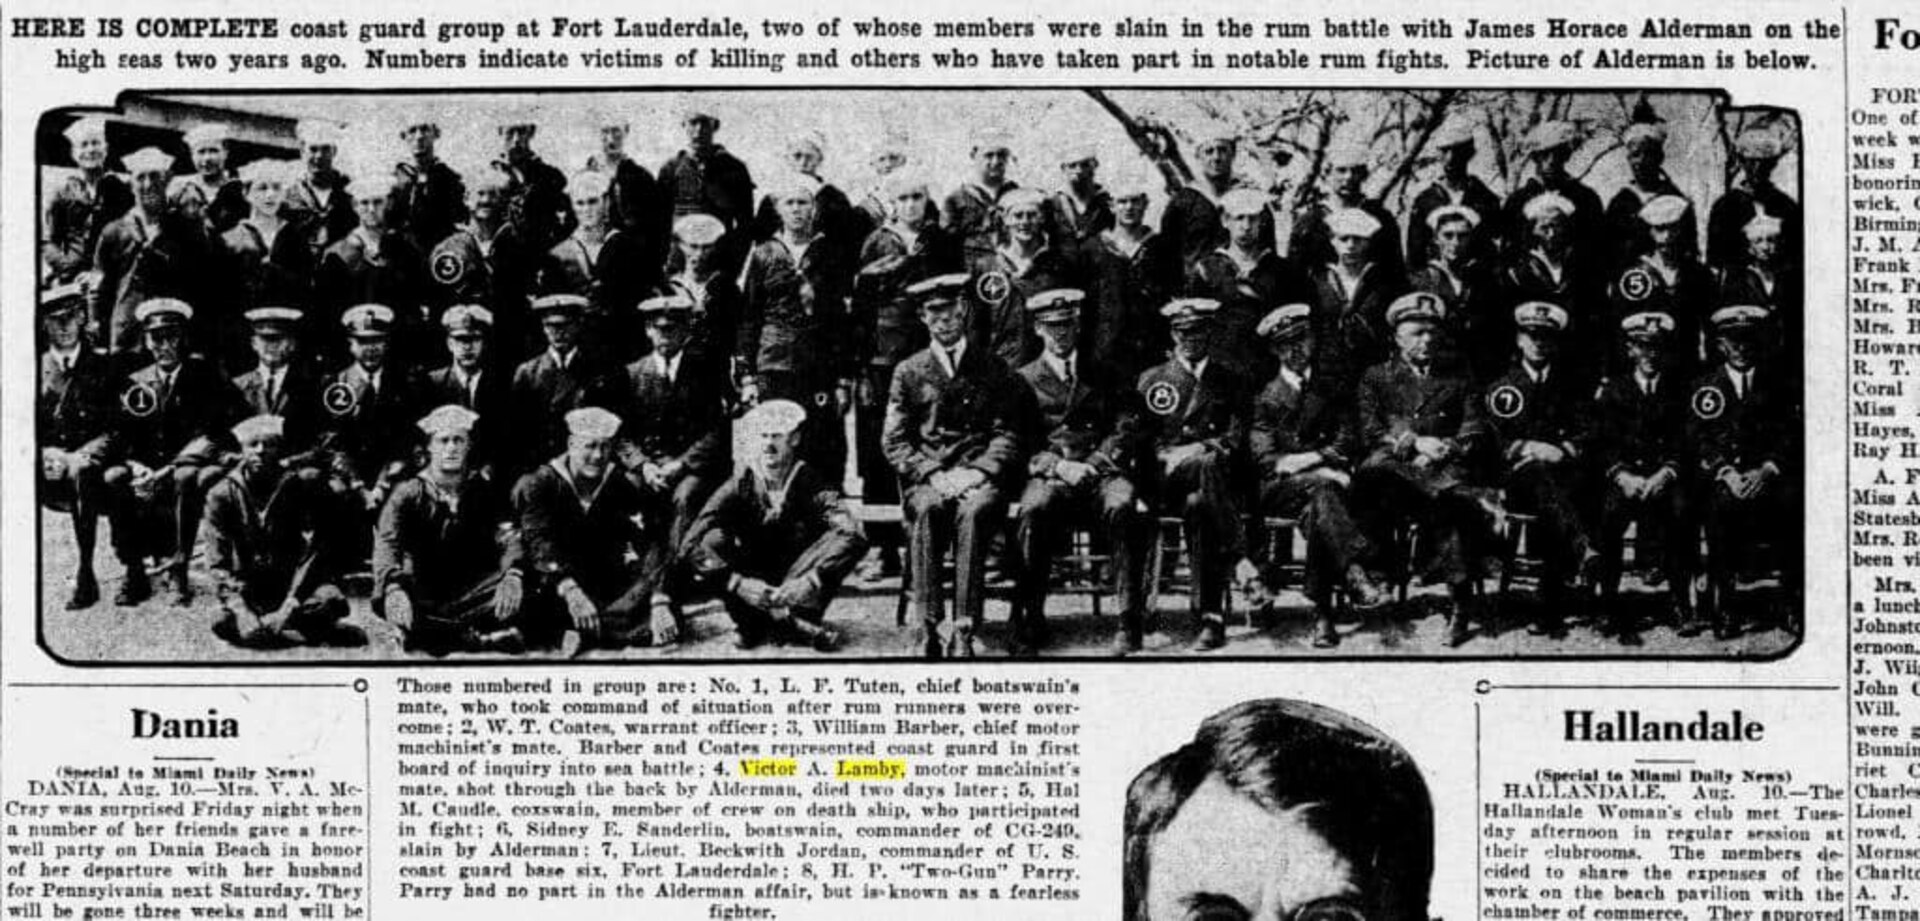 Cutting from an August 1929 issue of Miami Daily News showing the officers and enlisted men of Coast Guard Base Six. Two of the victims of the Alderman case are discernable in the faded photo. (Courtesy of Joseph Mercogliano)